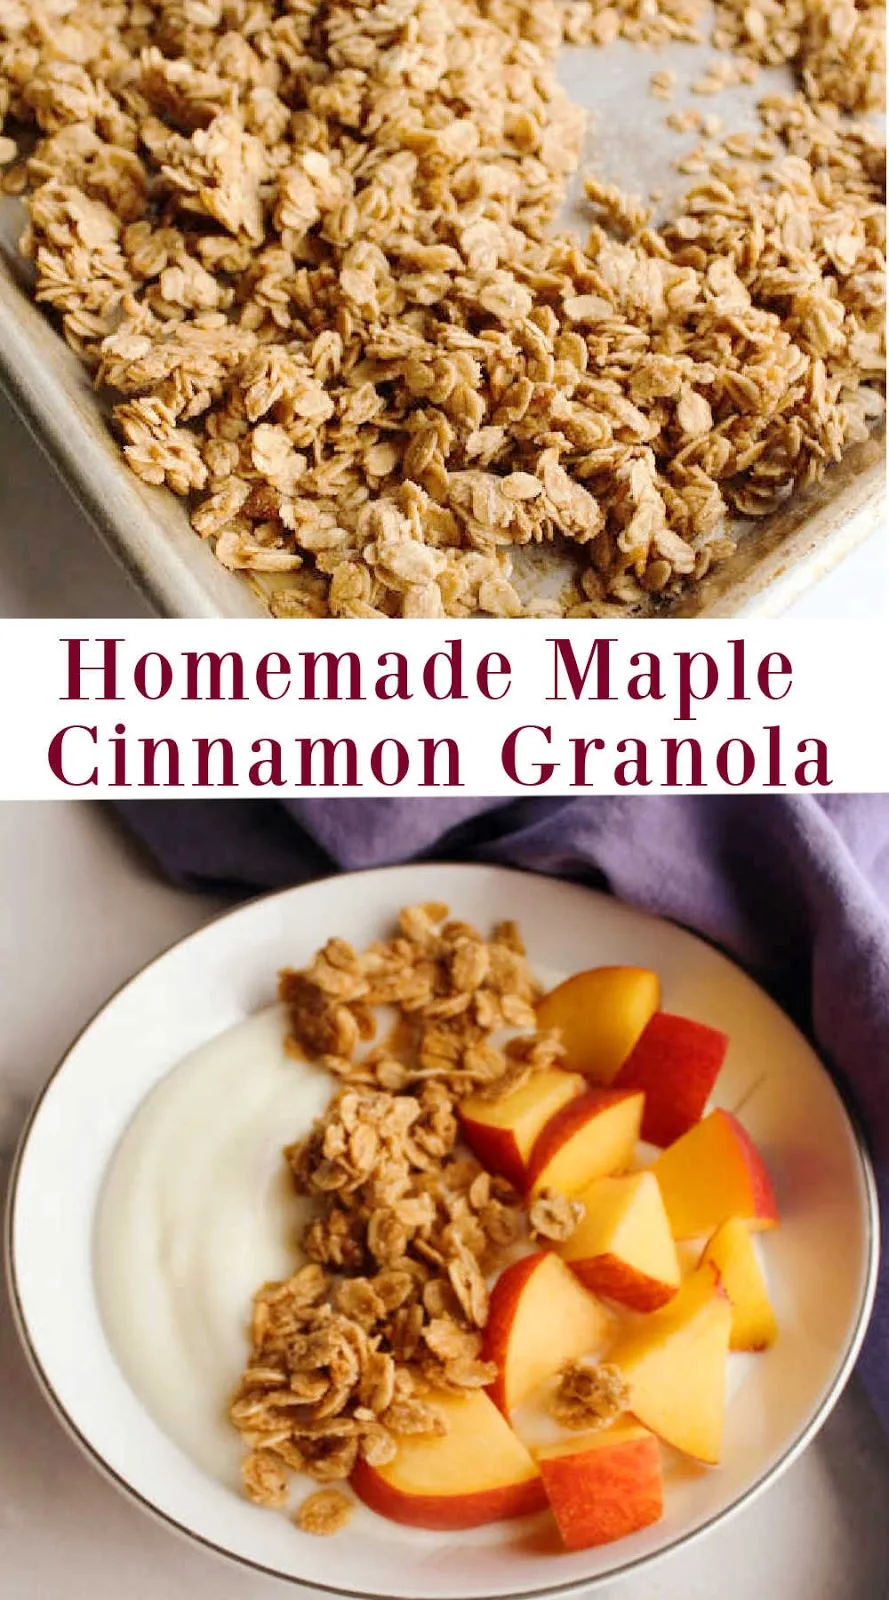 This is the best homemade granola recipe out there.  I am just sure of it!  It is crunchy, sweet and flavorful just like you would want it to be.  Plus it doesn't take more than a few minutes to put together.  There is some oven time, but almost no work! It taste of maple syrup, cinnamon and toasted oatmeal. So good! Throw in a handful of pecans if you'd like and you'll really be in heaven!